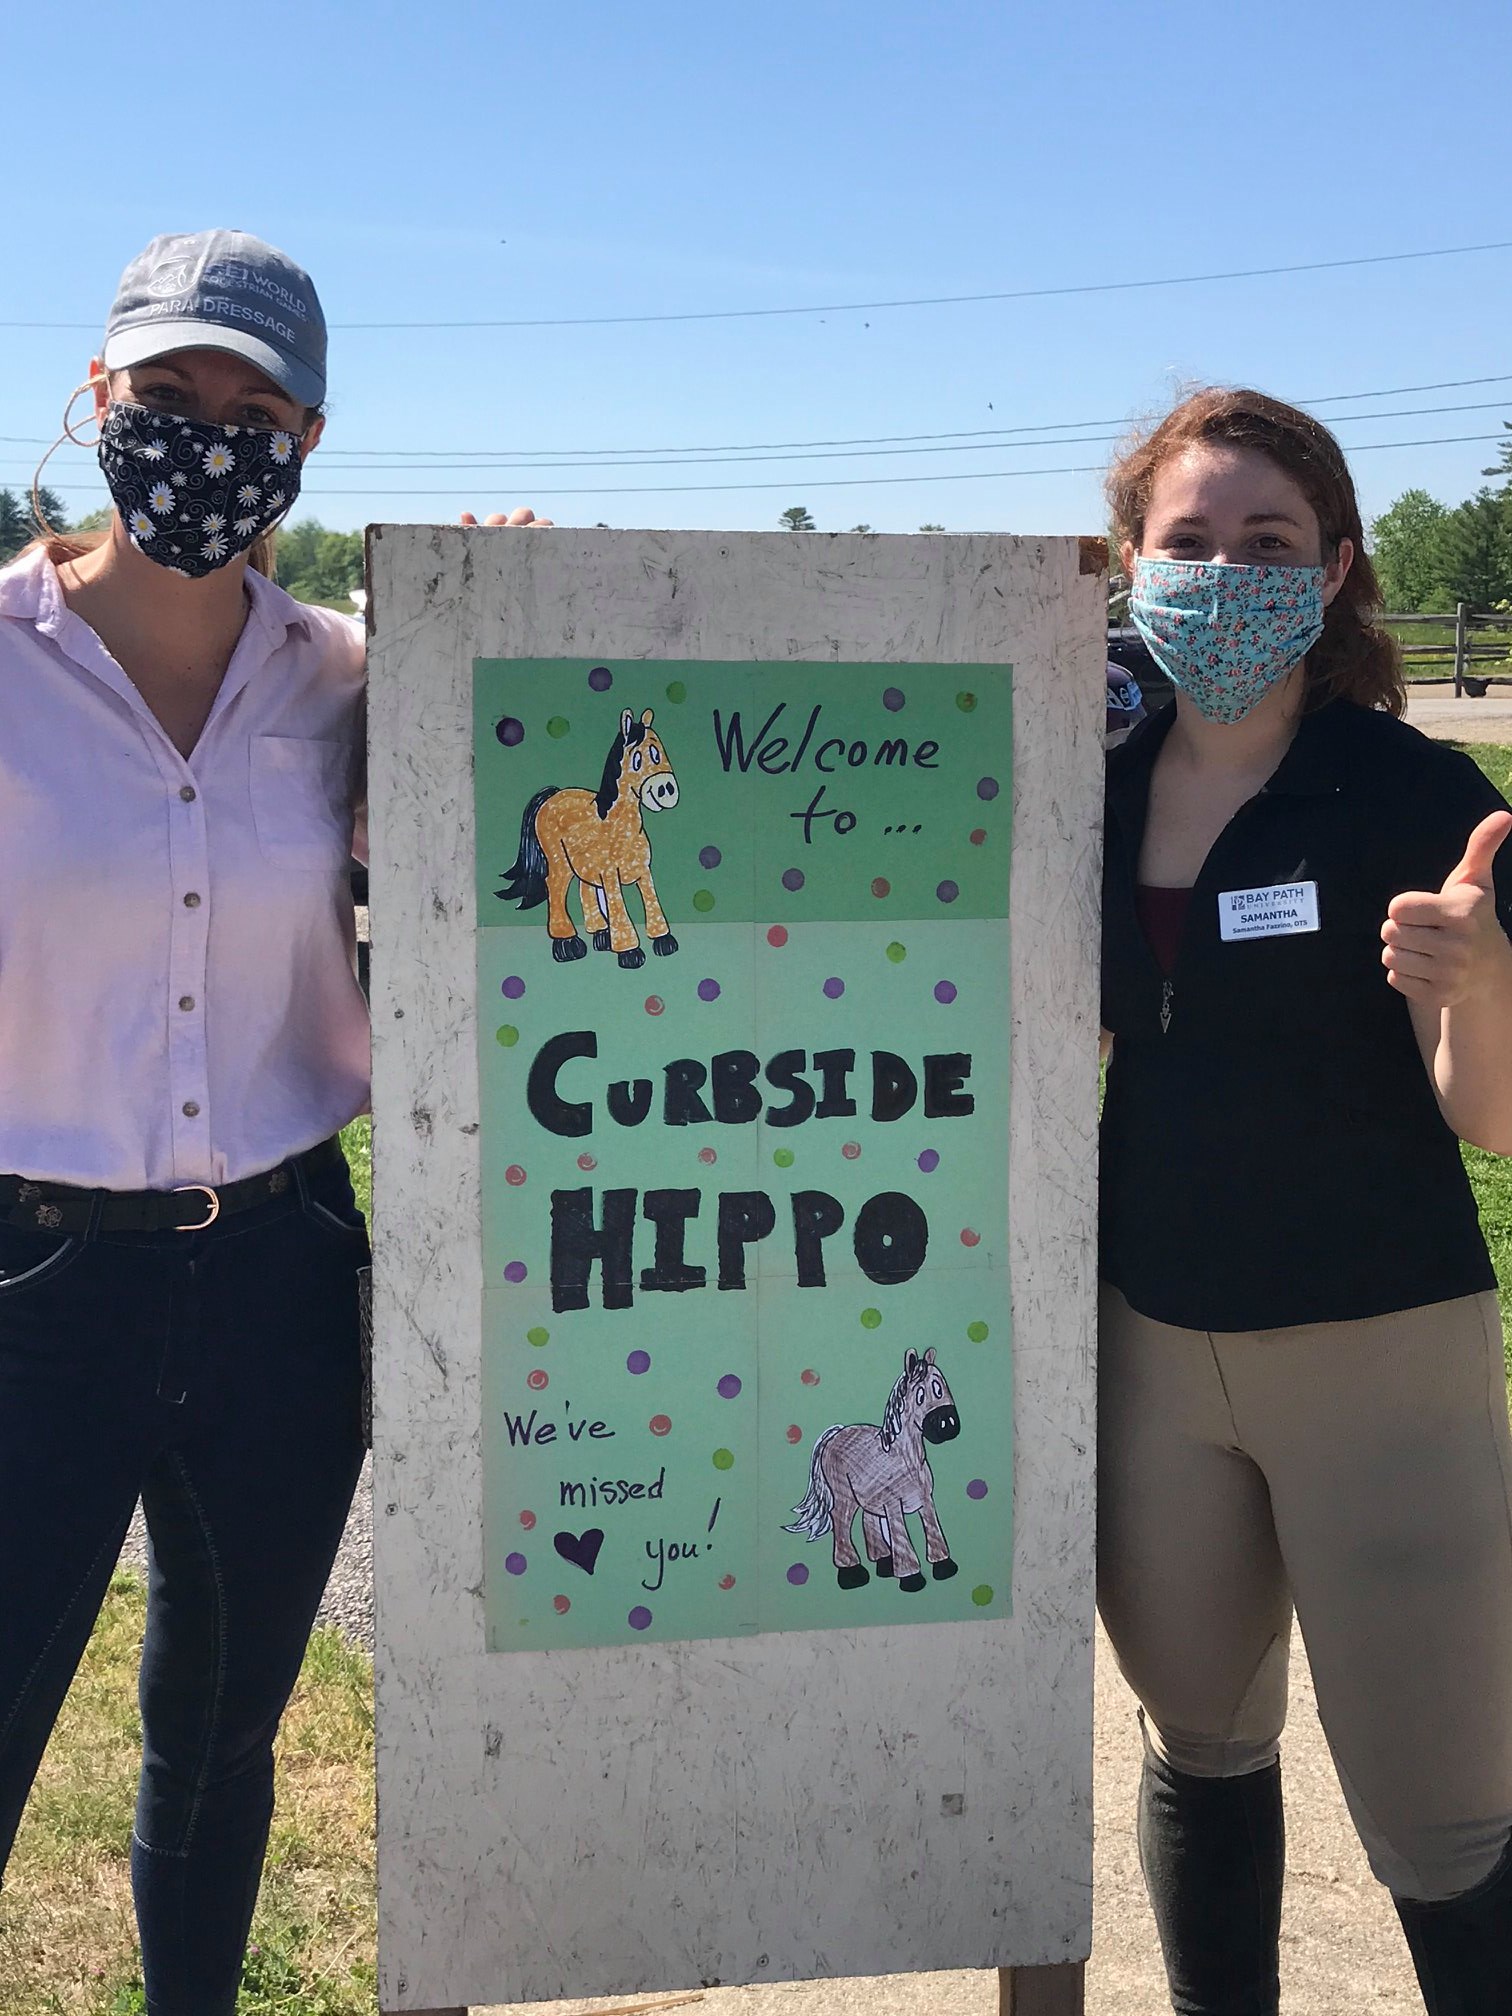 Photo of 2 interns holding a "curbside hippo" sign.